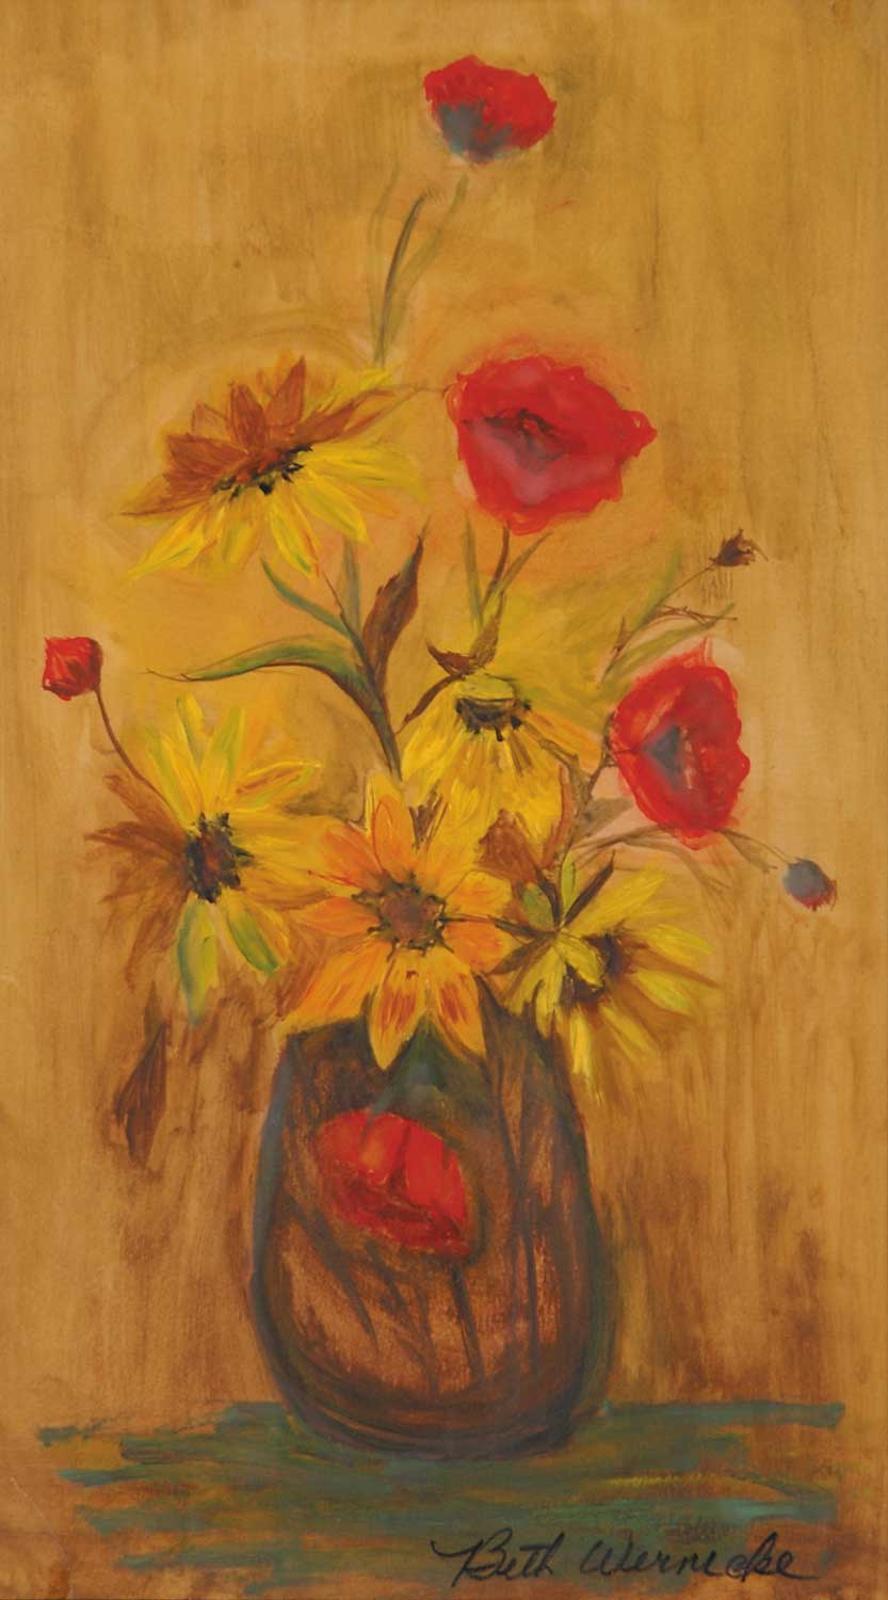 Beth Wernicke - Untitled - Red and Yellow Flowers in Vase